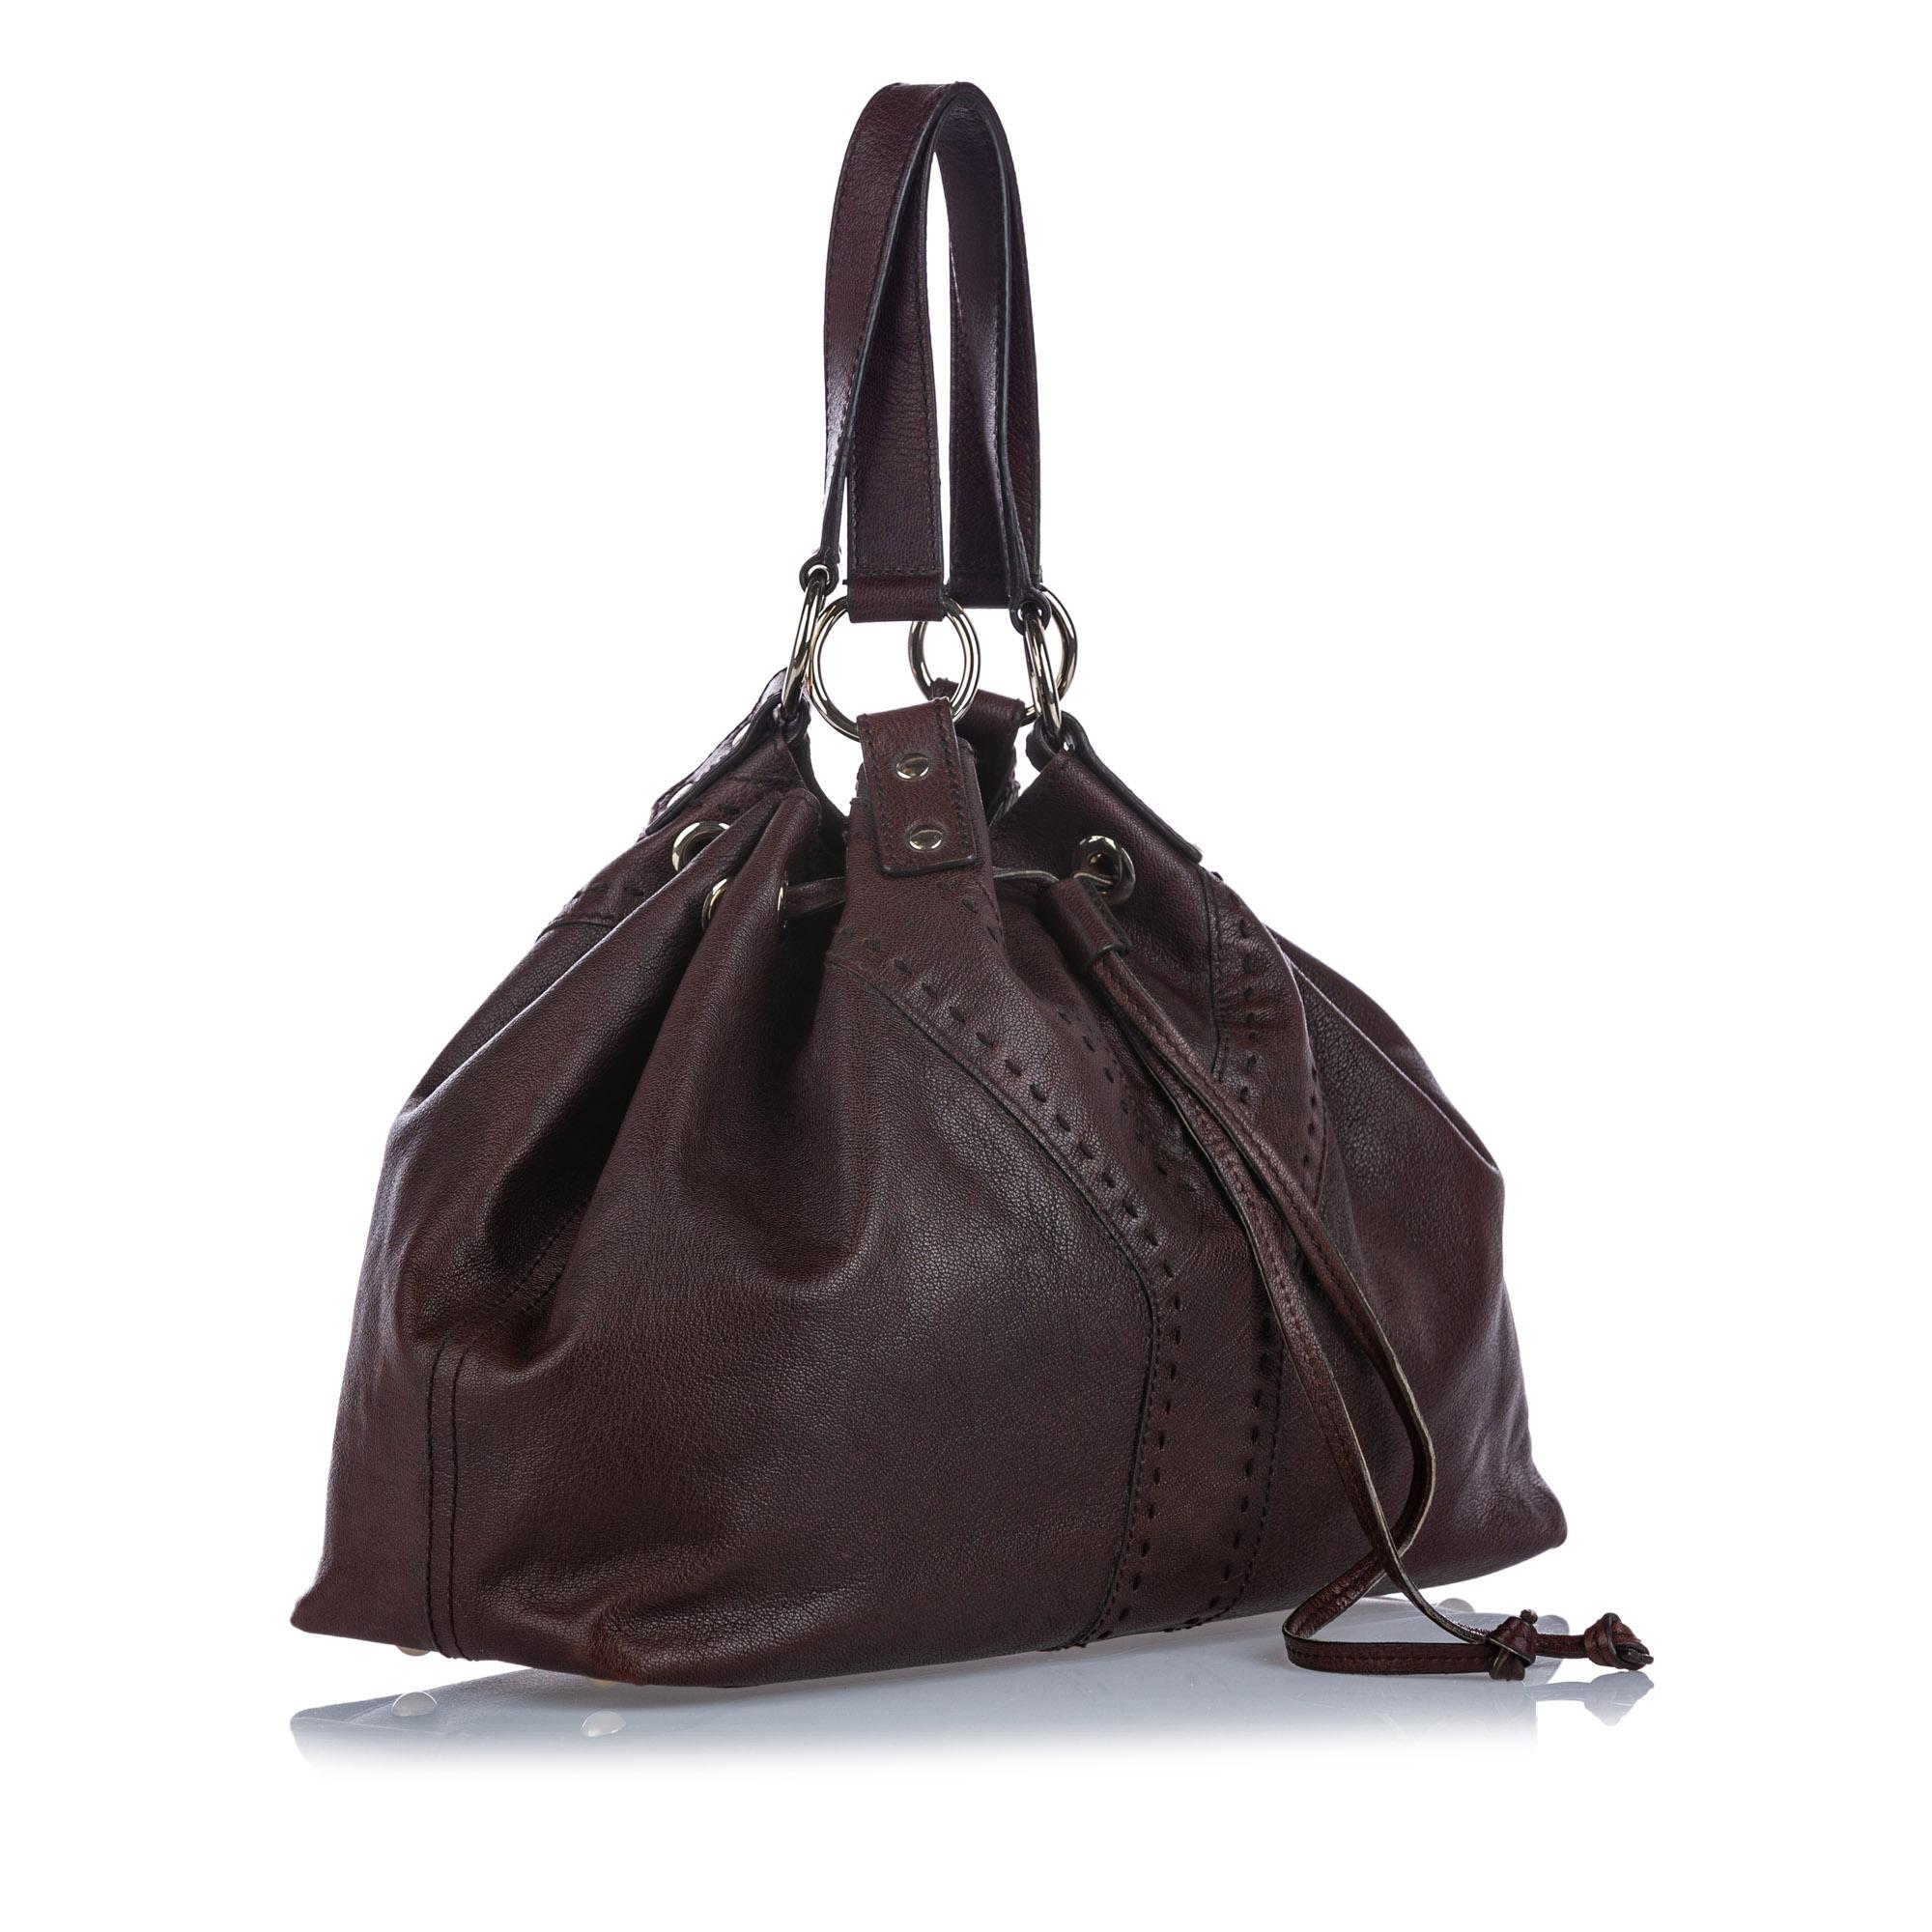 The Double Sac features a leather body, flat leather straps, and a top drawstring closure. It carries as B+ condition rating.

Inclusions: 
This item does not come with inclusions.

Dimensions:
Length: 28.00 cm
Width: 36.00 cm
Depth: 10.00